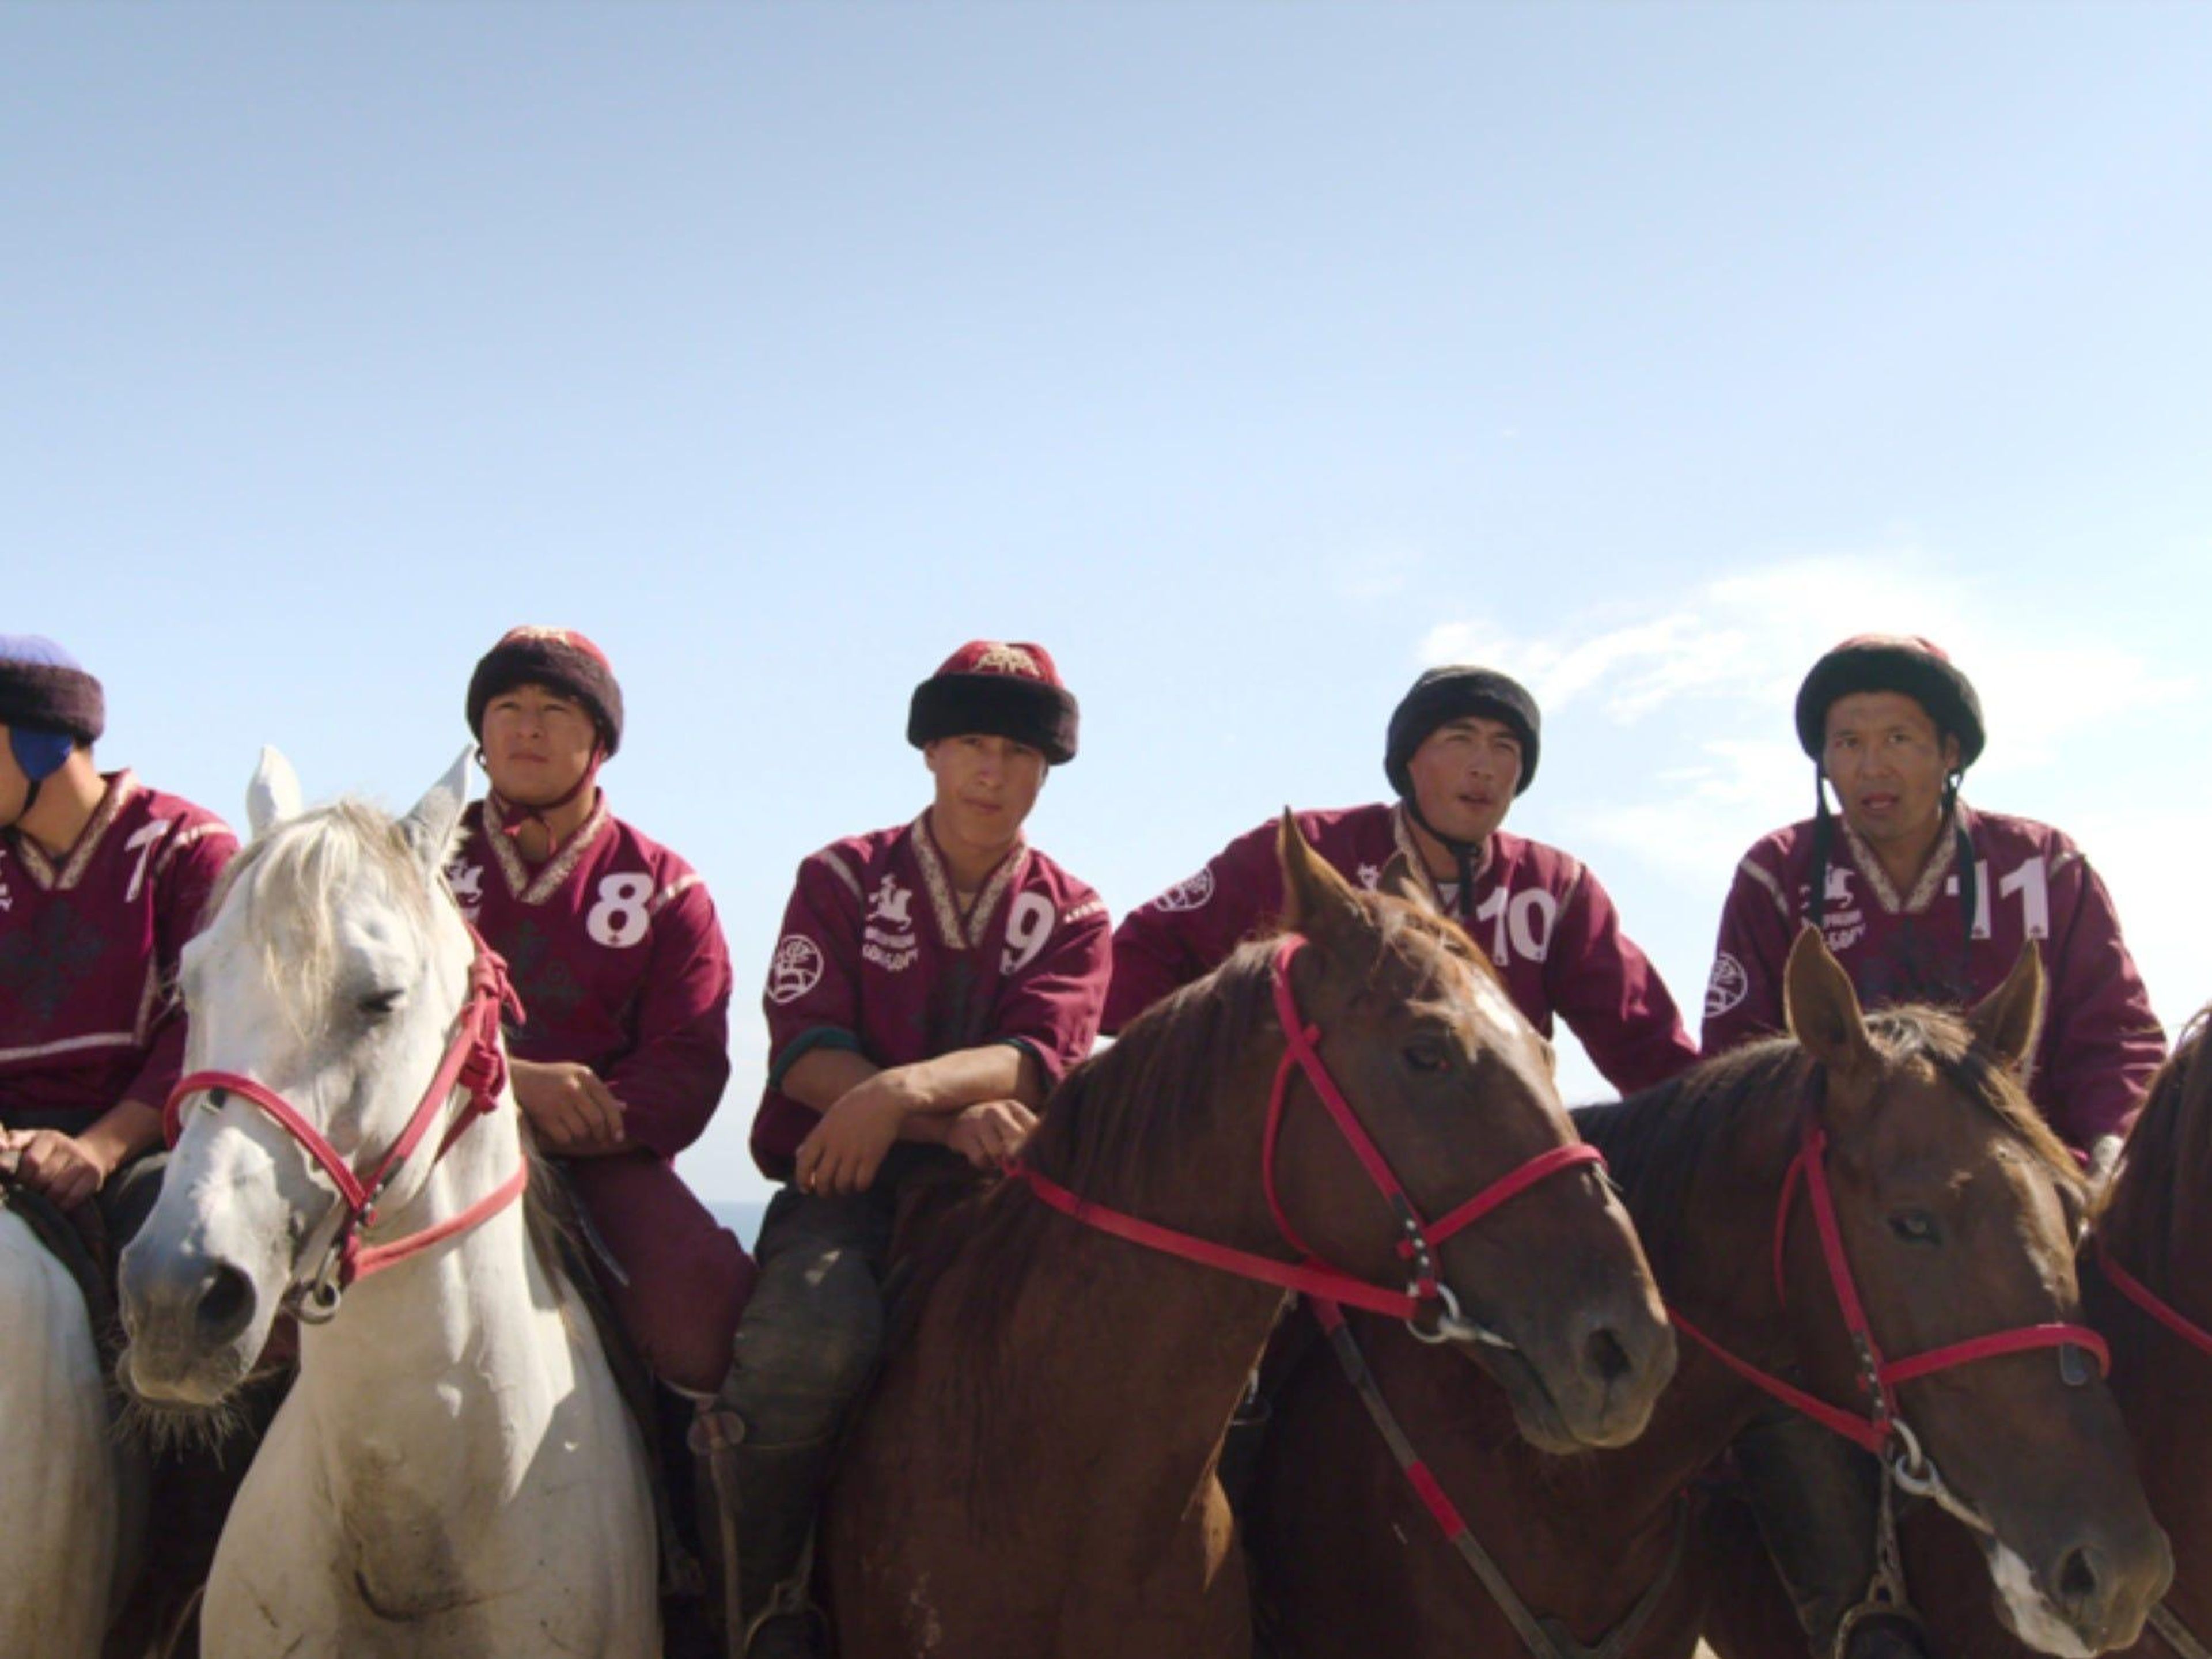 The fifth episode of "Home Game" is about the Kyrgyzstan sport Kok-Boru, which uses a dead goat as the ball.